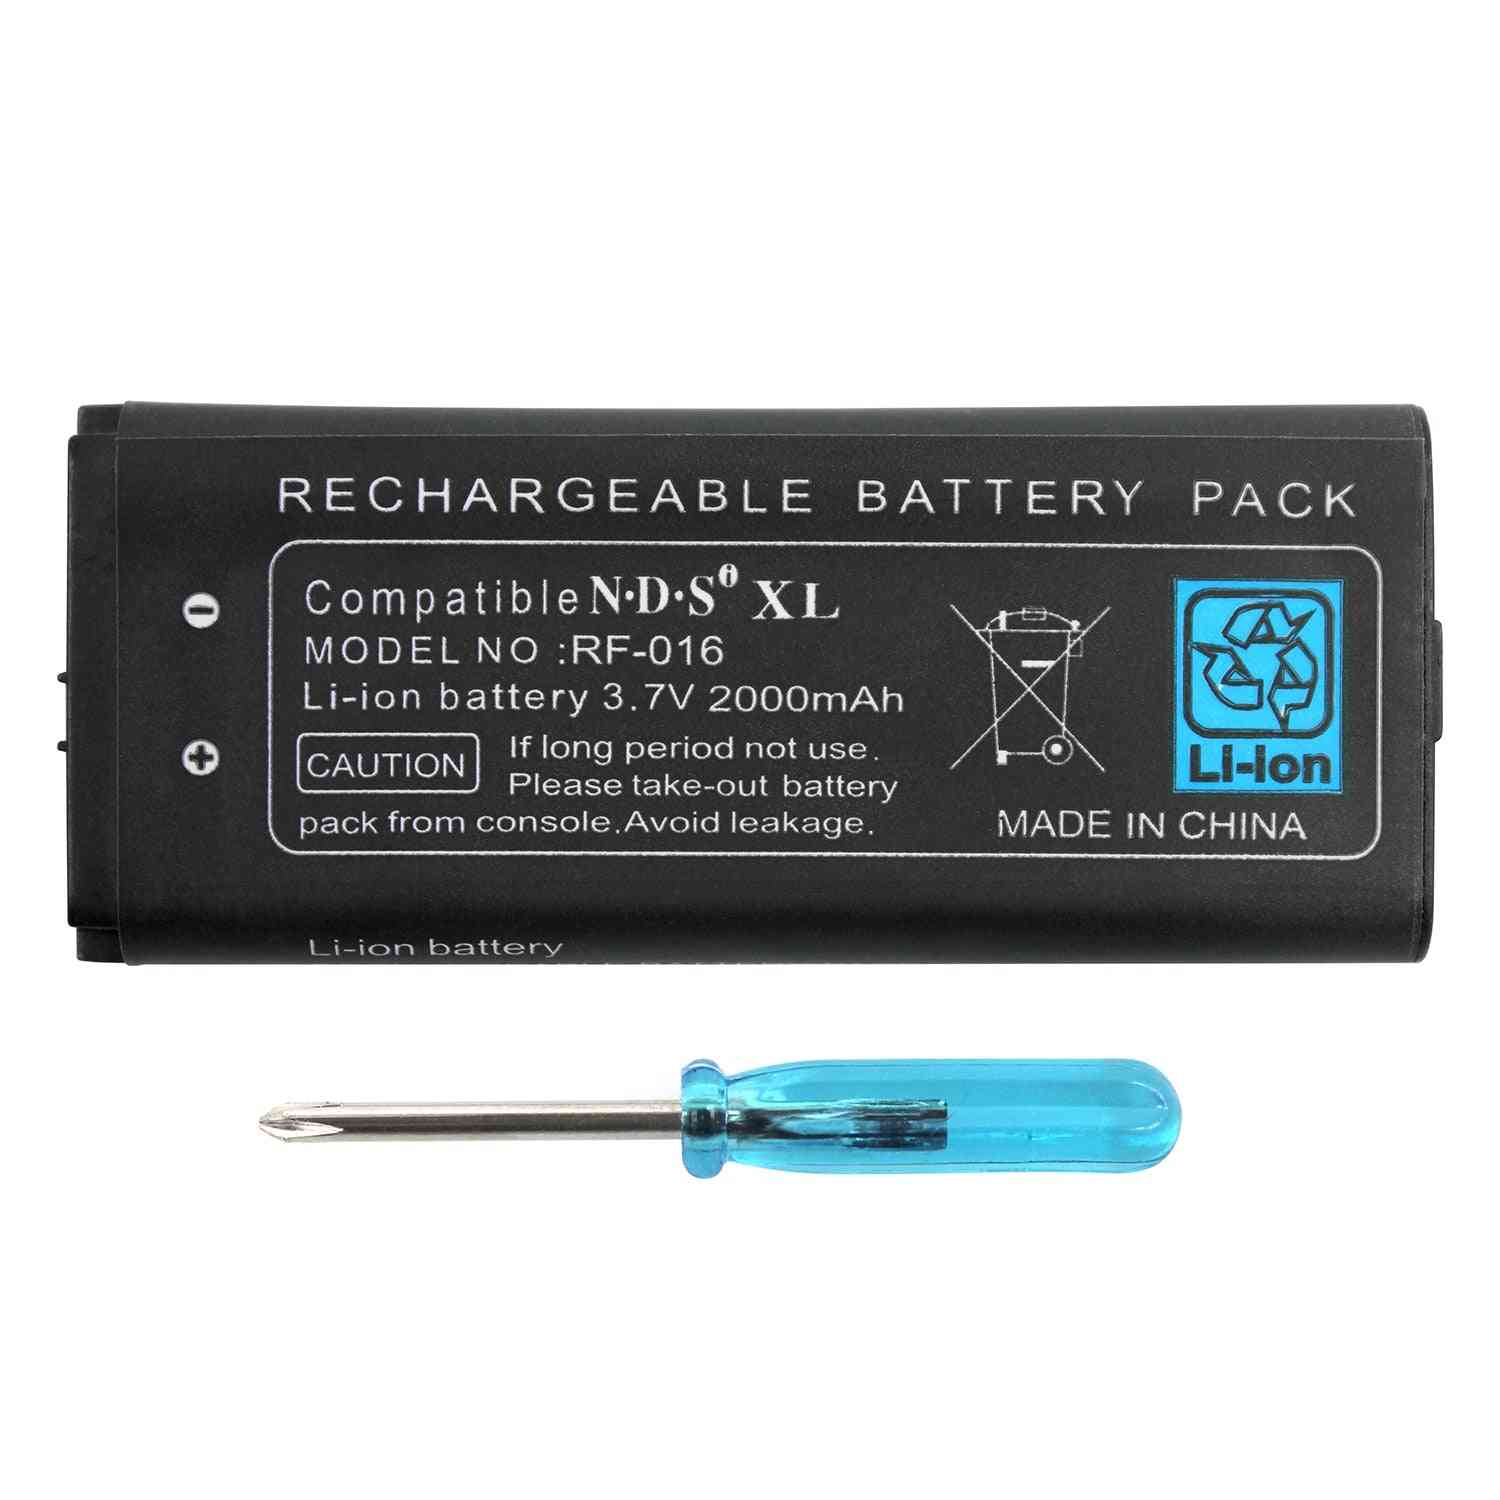 2000mah Rechargeable Lithium-ion Battery + Tool Kit For Nintendo Ill/xl